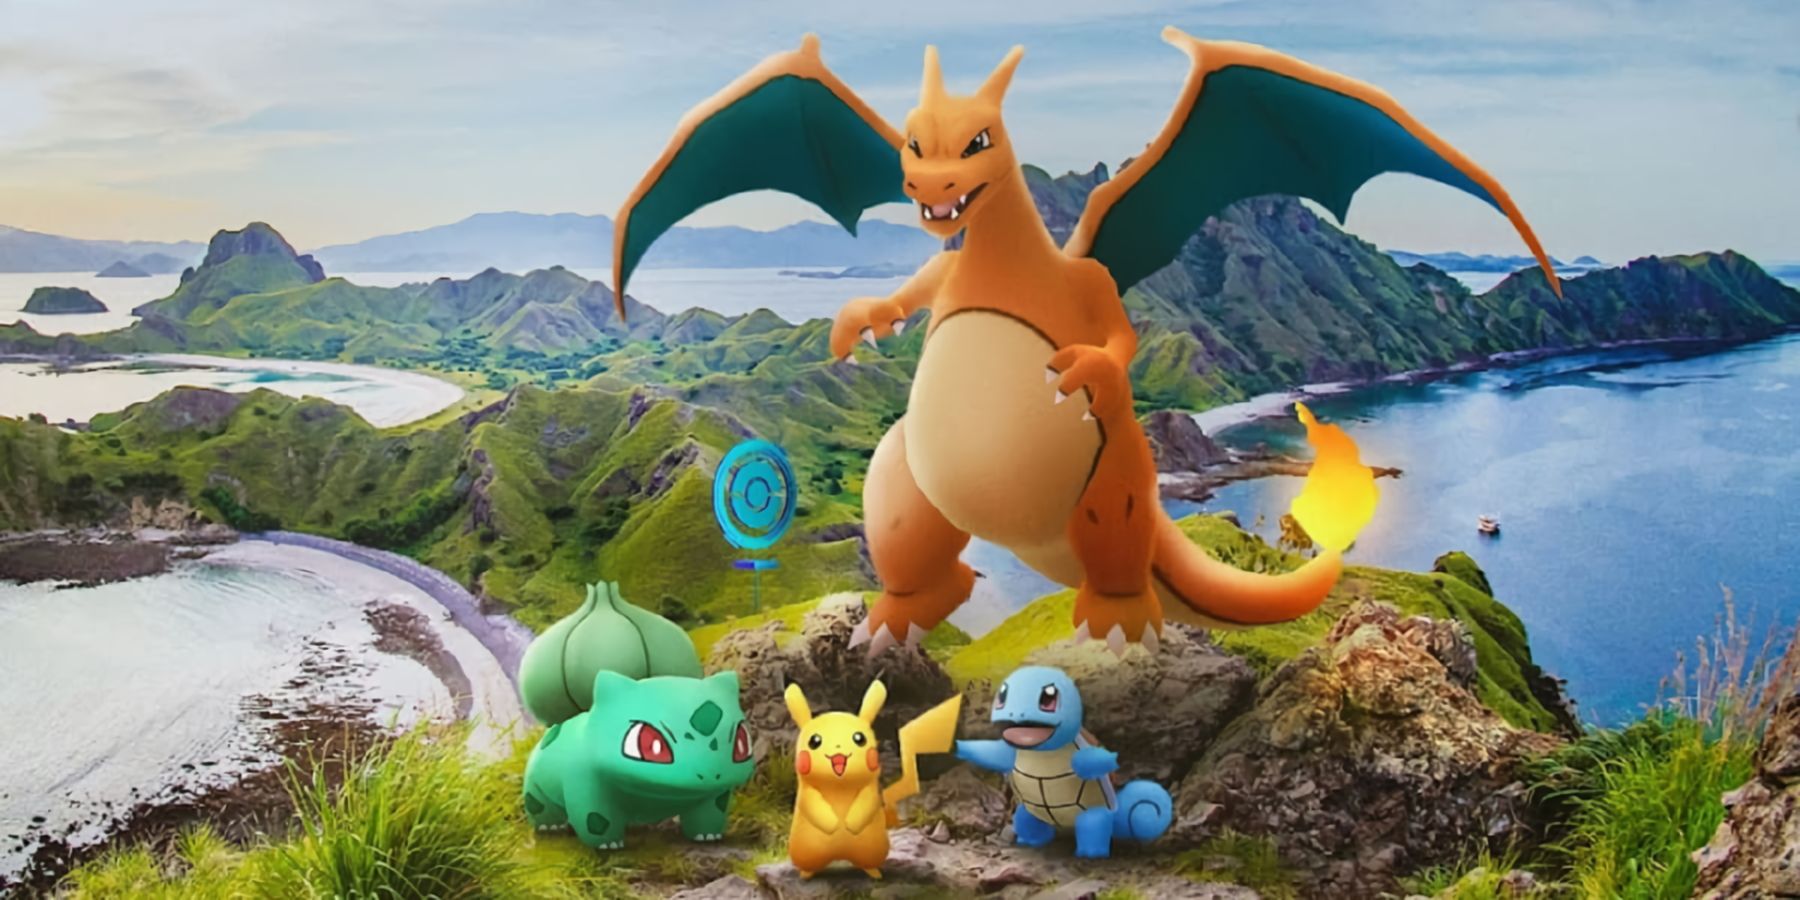 A key visual from Pokemon GO showcasing Pikachu, Bulbasaur, Charizard, and Squirtle.